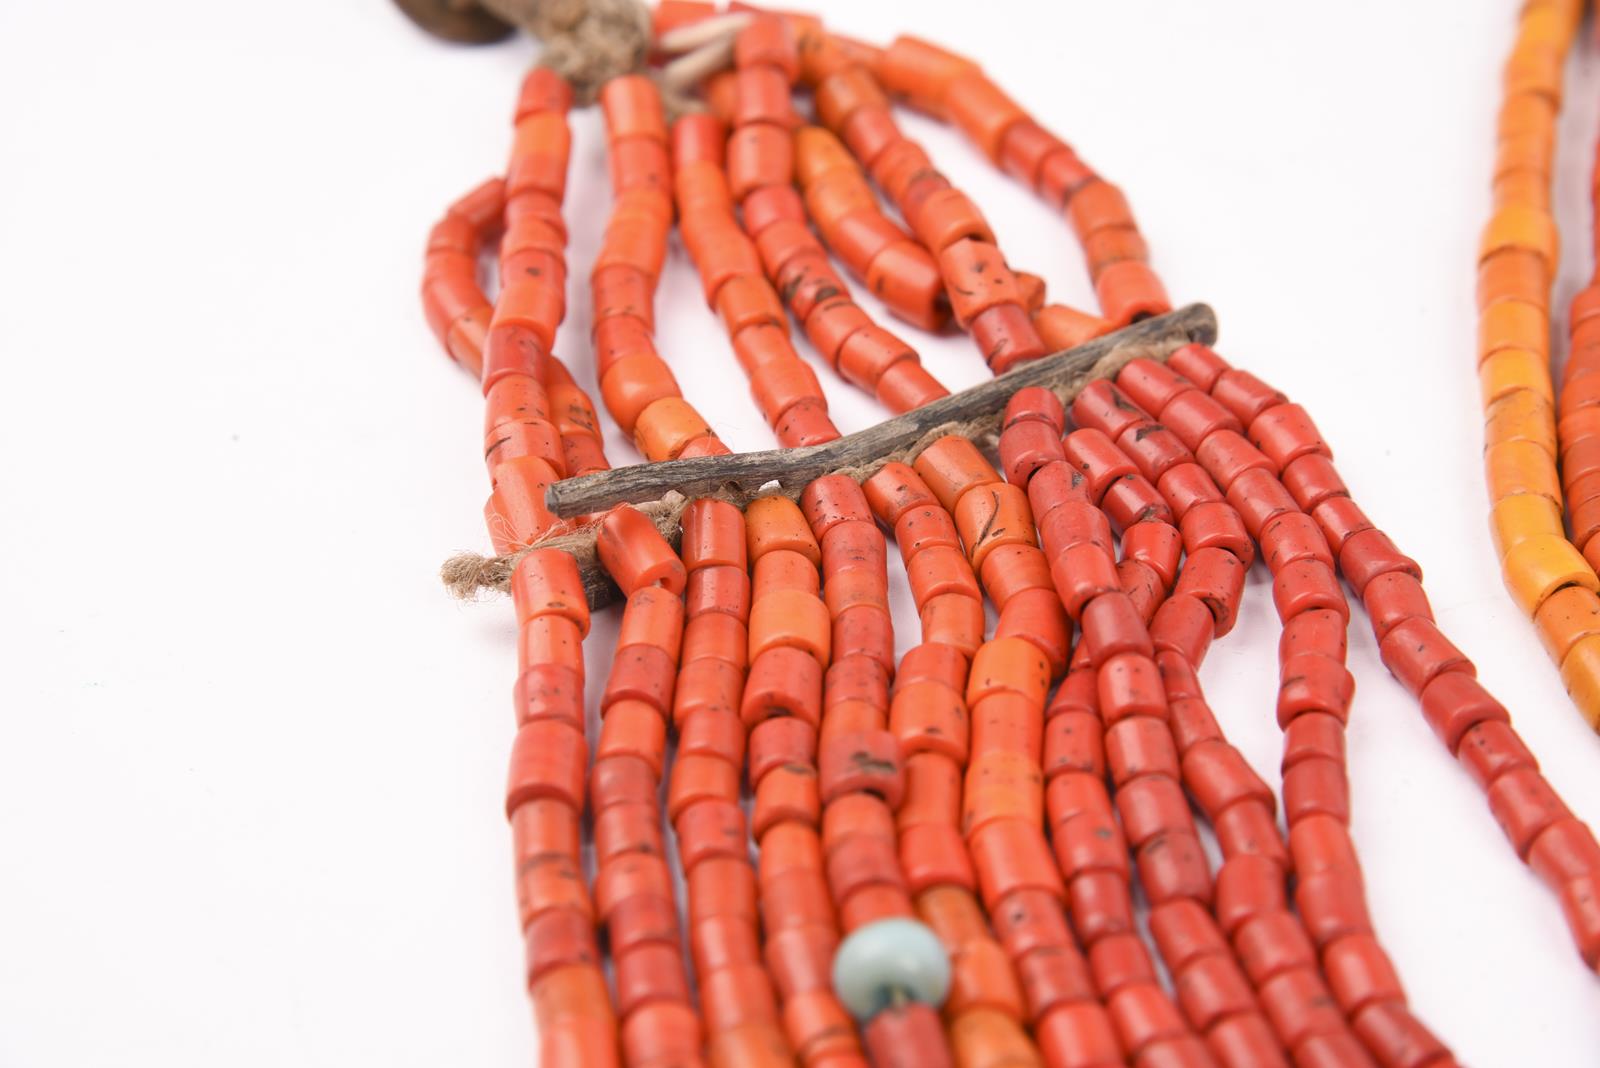 Three Naga necklaces Nagaland coloured and clear glass beads, brass and bone spacers, pig teeth - Image 6 of 6